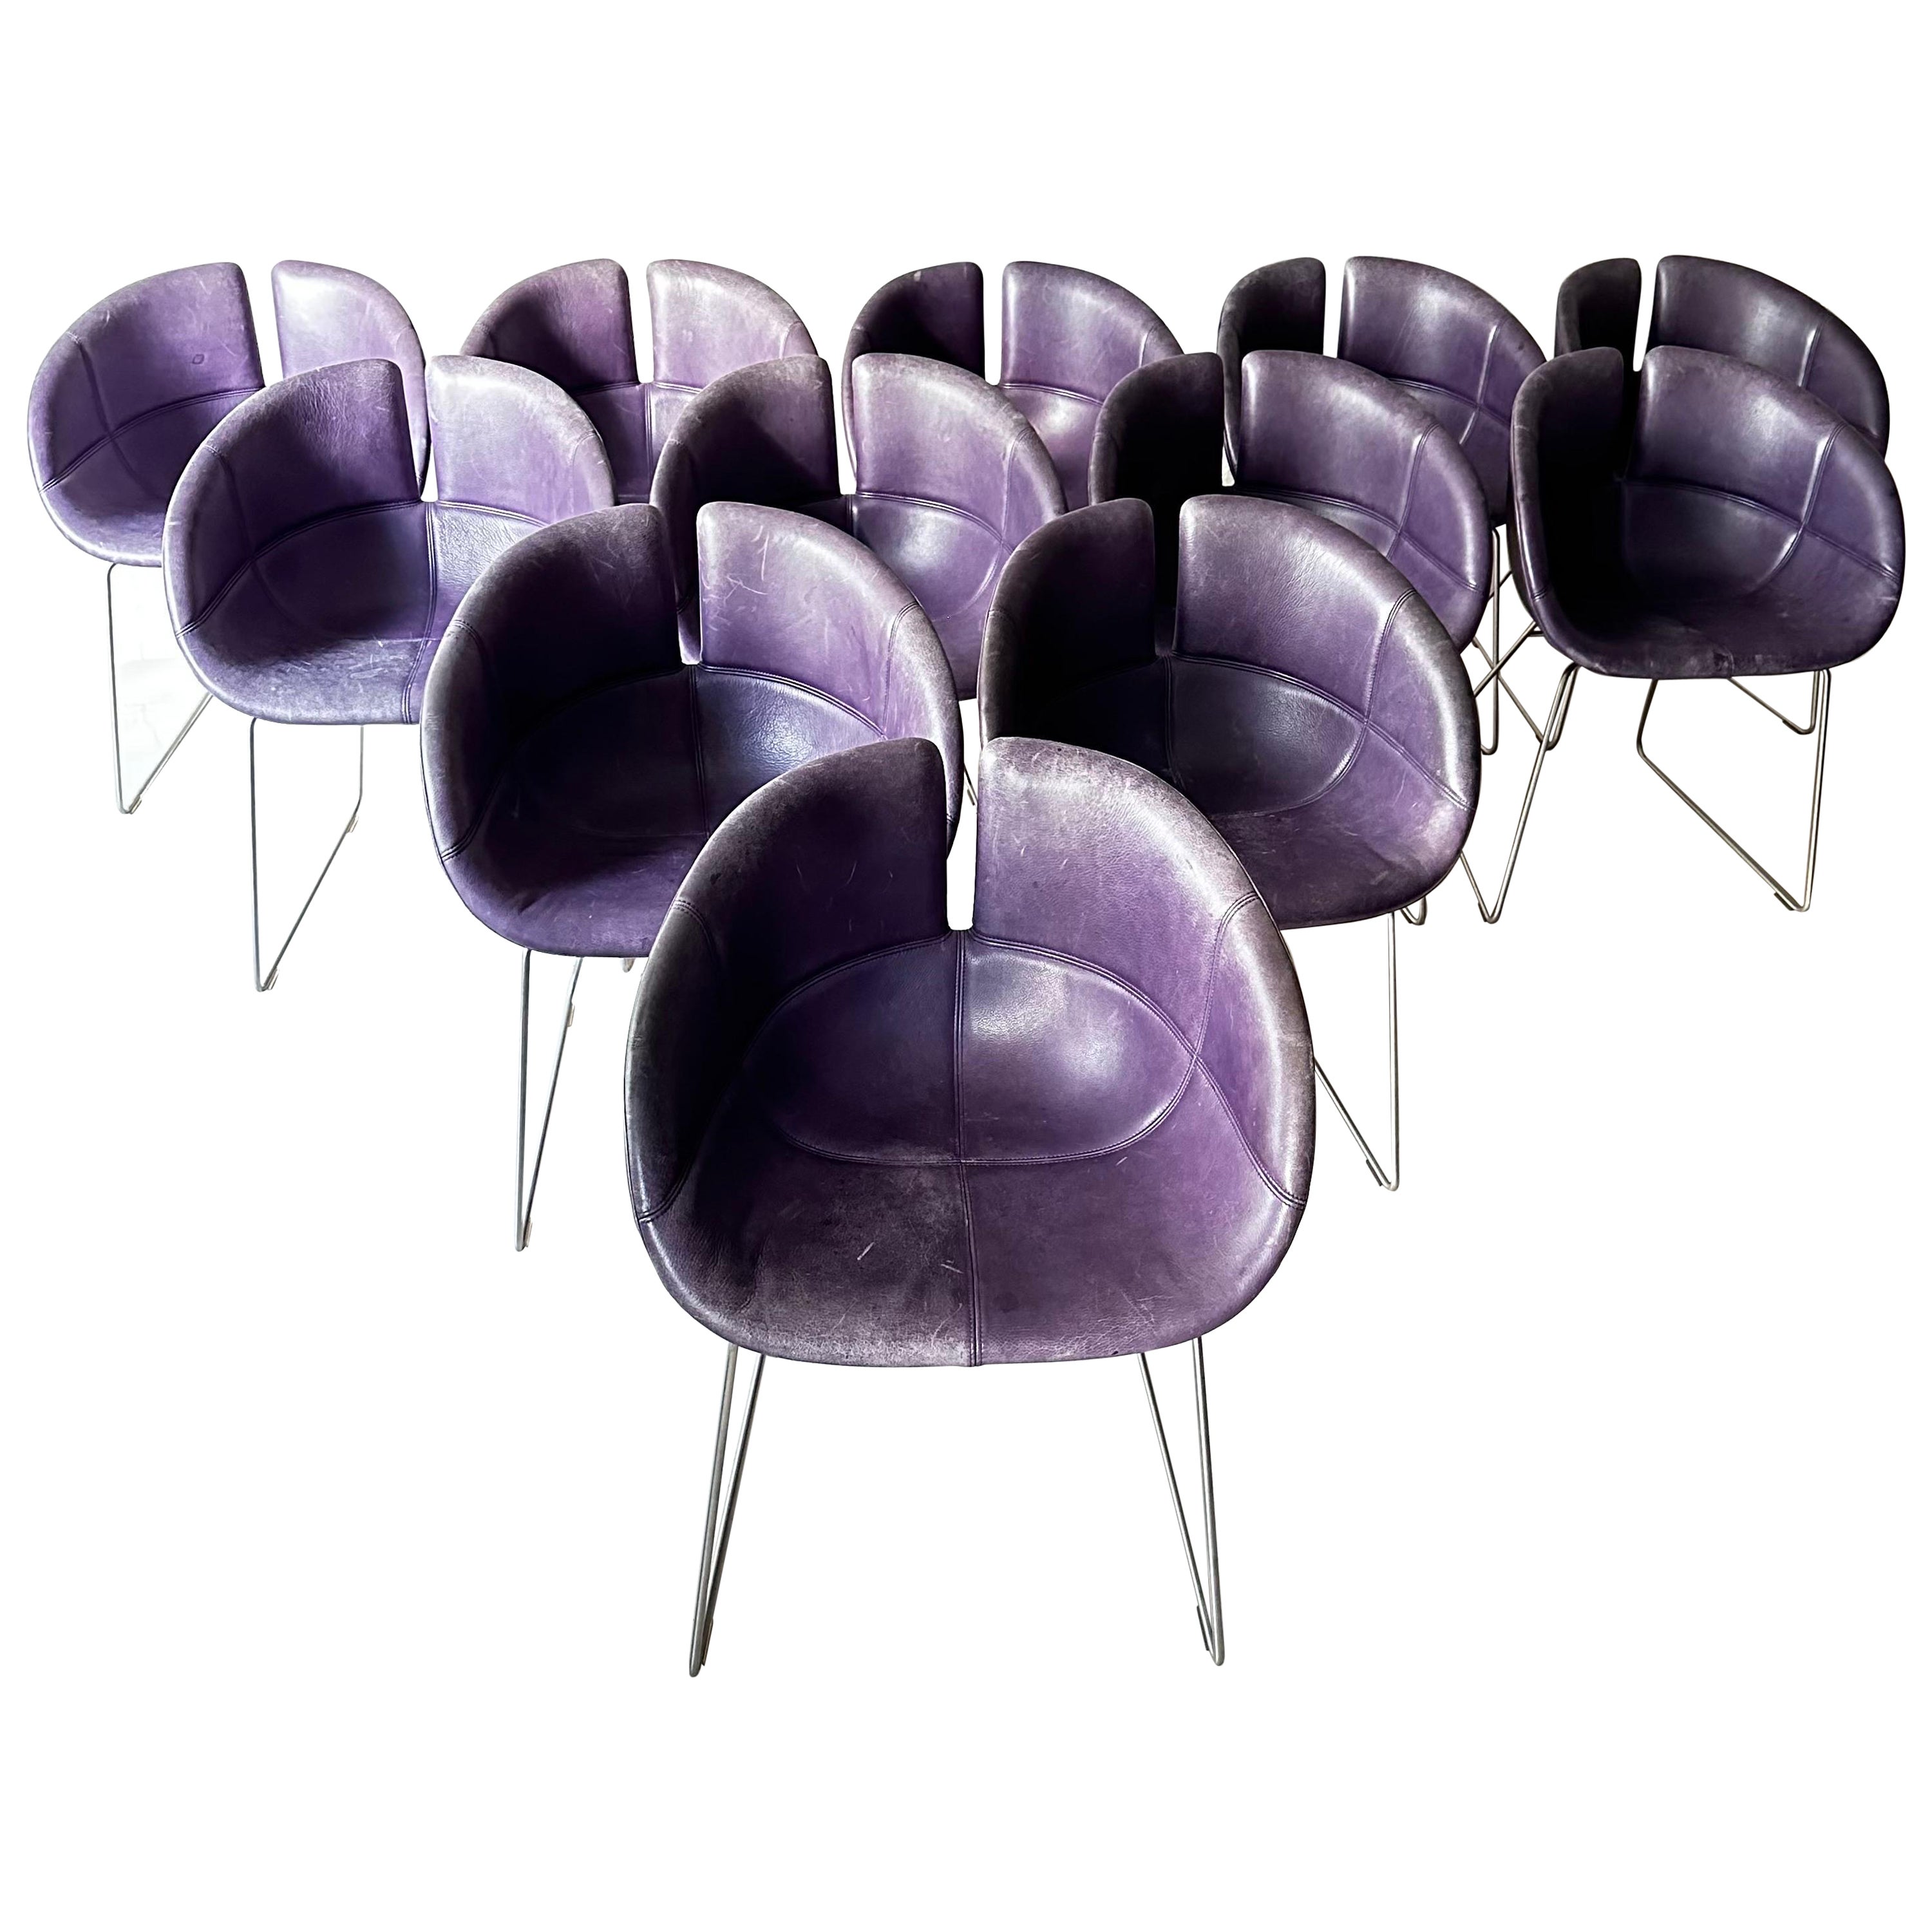 Set of 12 Moroso Dining Chairs in Purple Leather by Patricia Urquiola 2002 For Sale